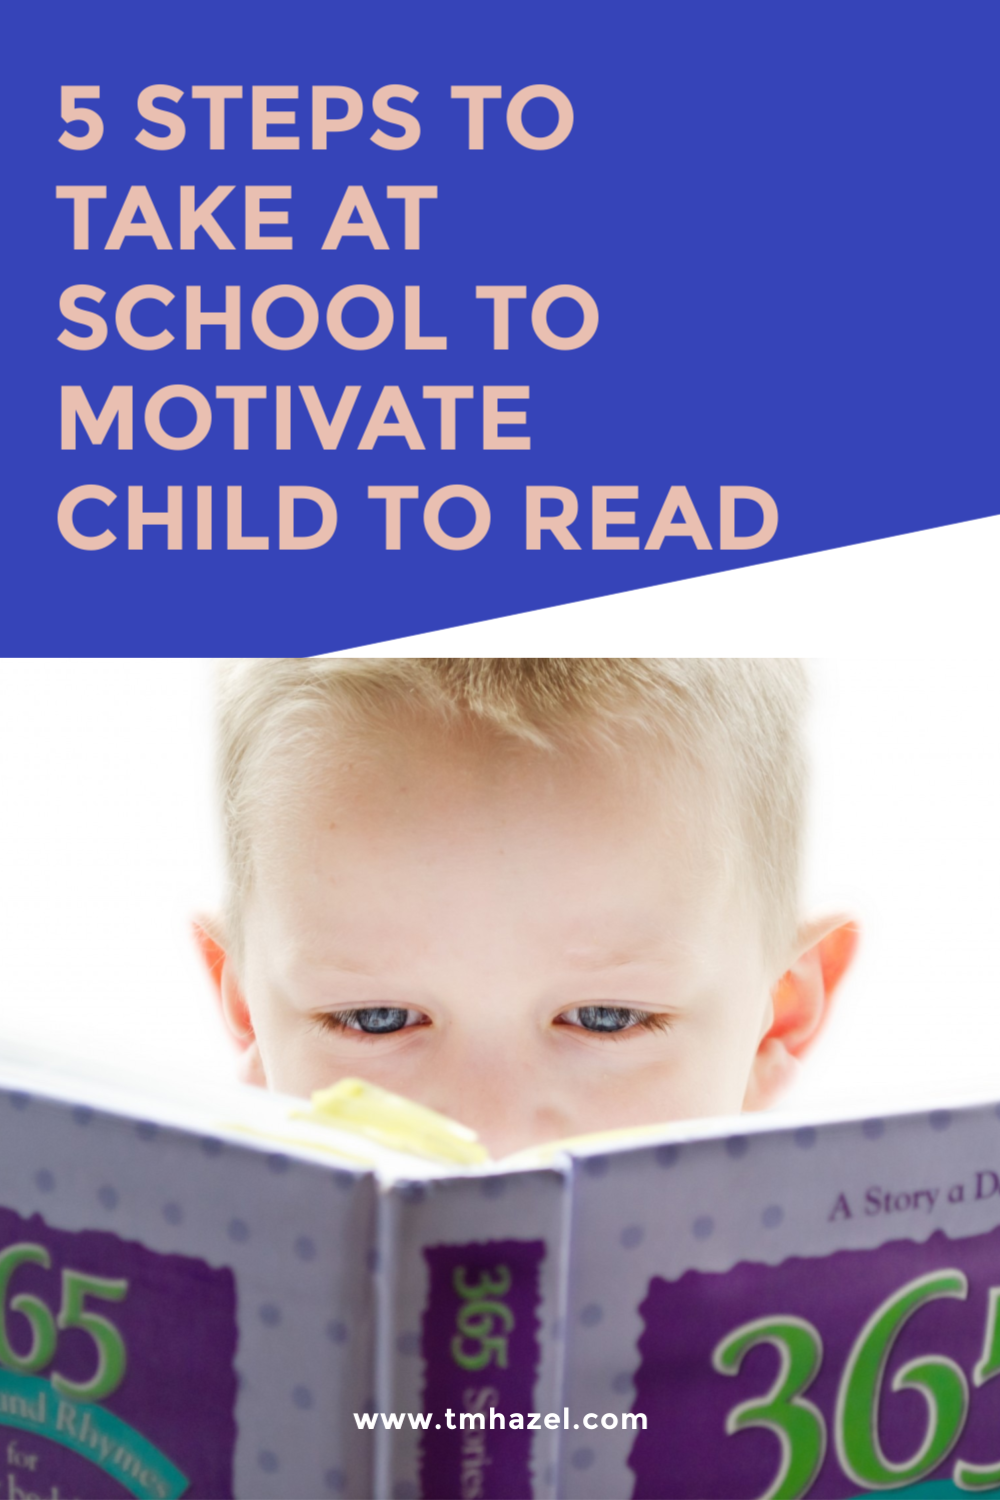 5 steps to take at school to motivate child read more